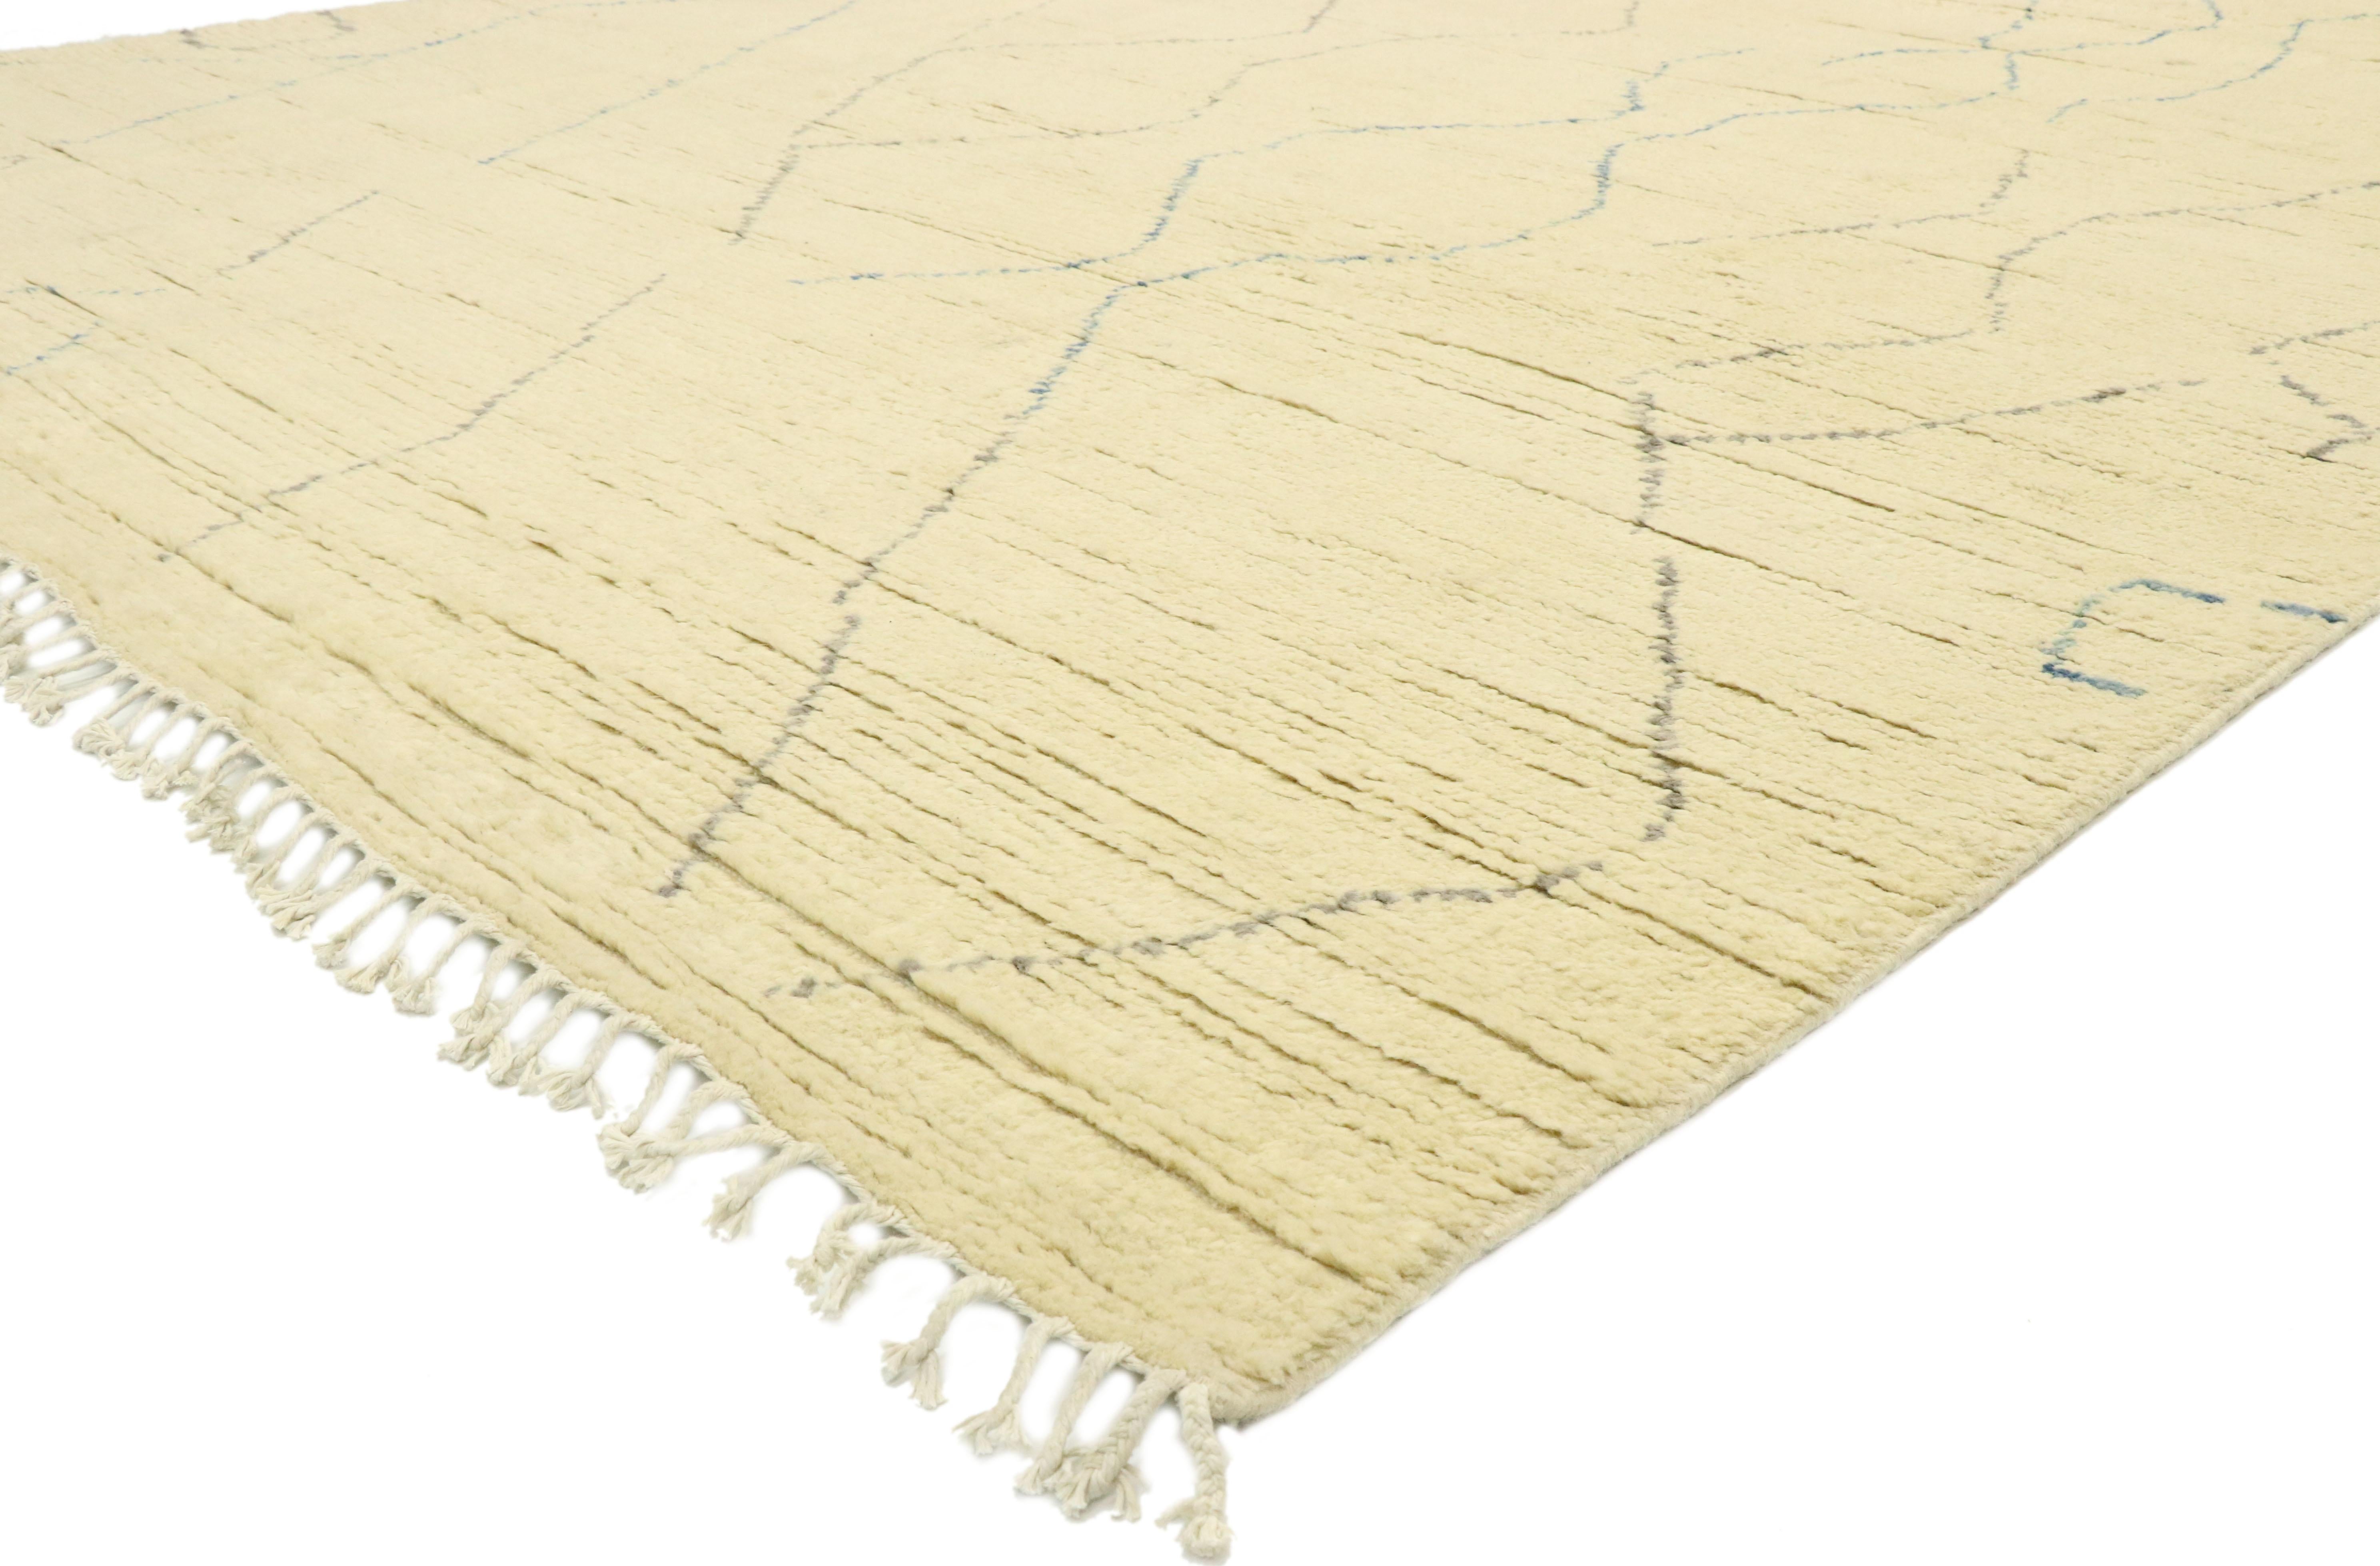 80631, new contemporary Moroccan Area rug with cozy boho chic style and hygge vibes. This hand knotted wool contemporary Moroccan area rug features contrasting gray and light blue lines running the length of the sandy-beige backdrop. The thin lines